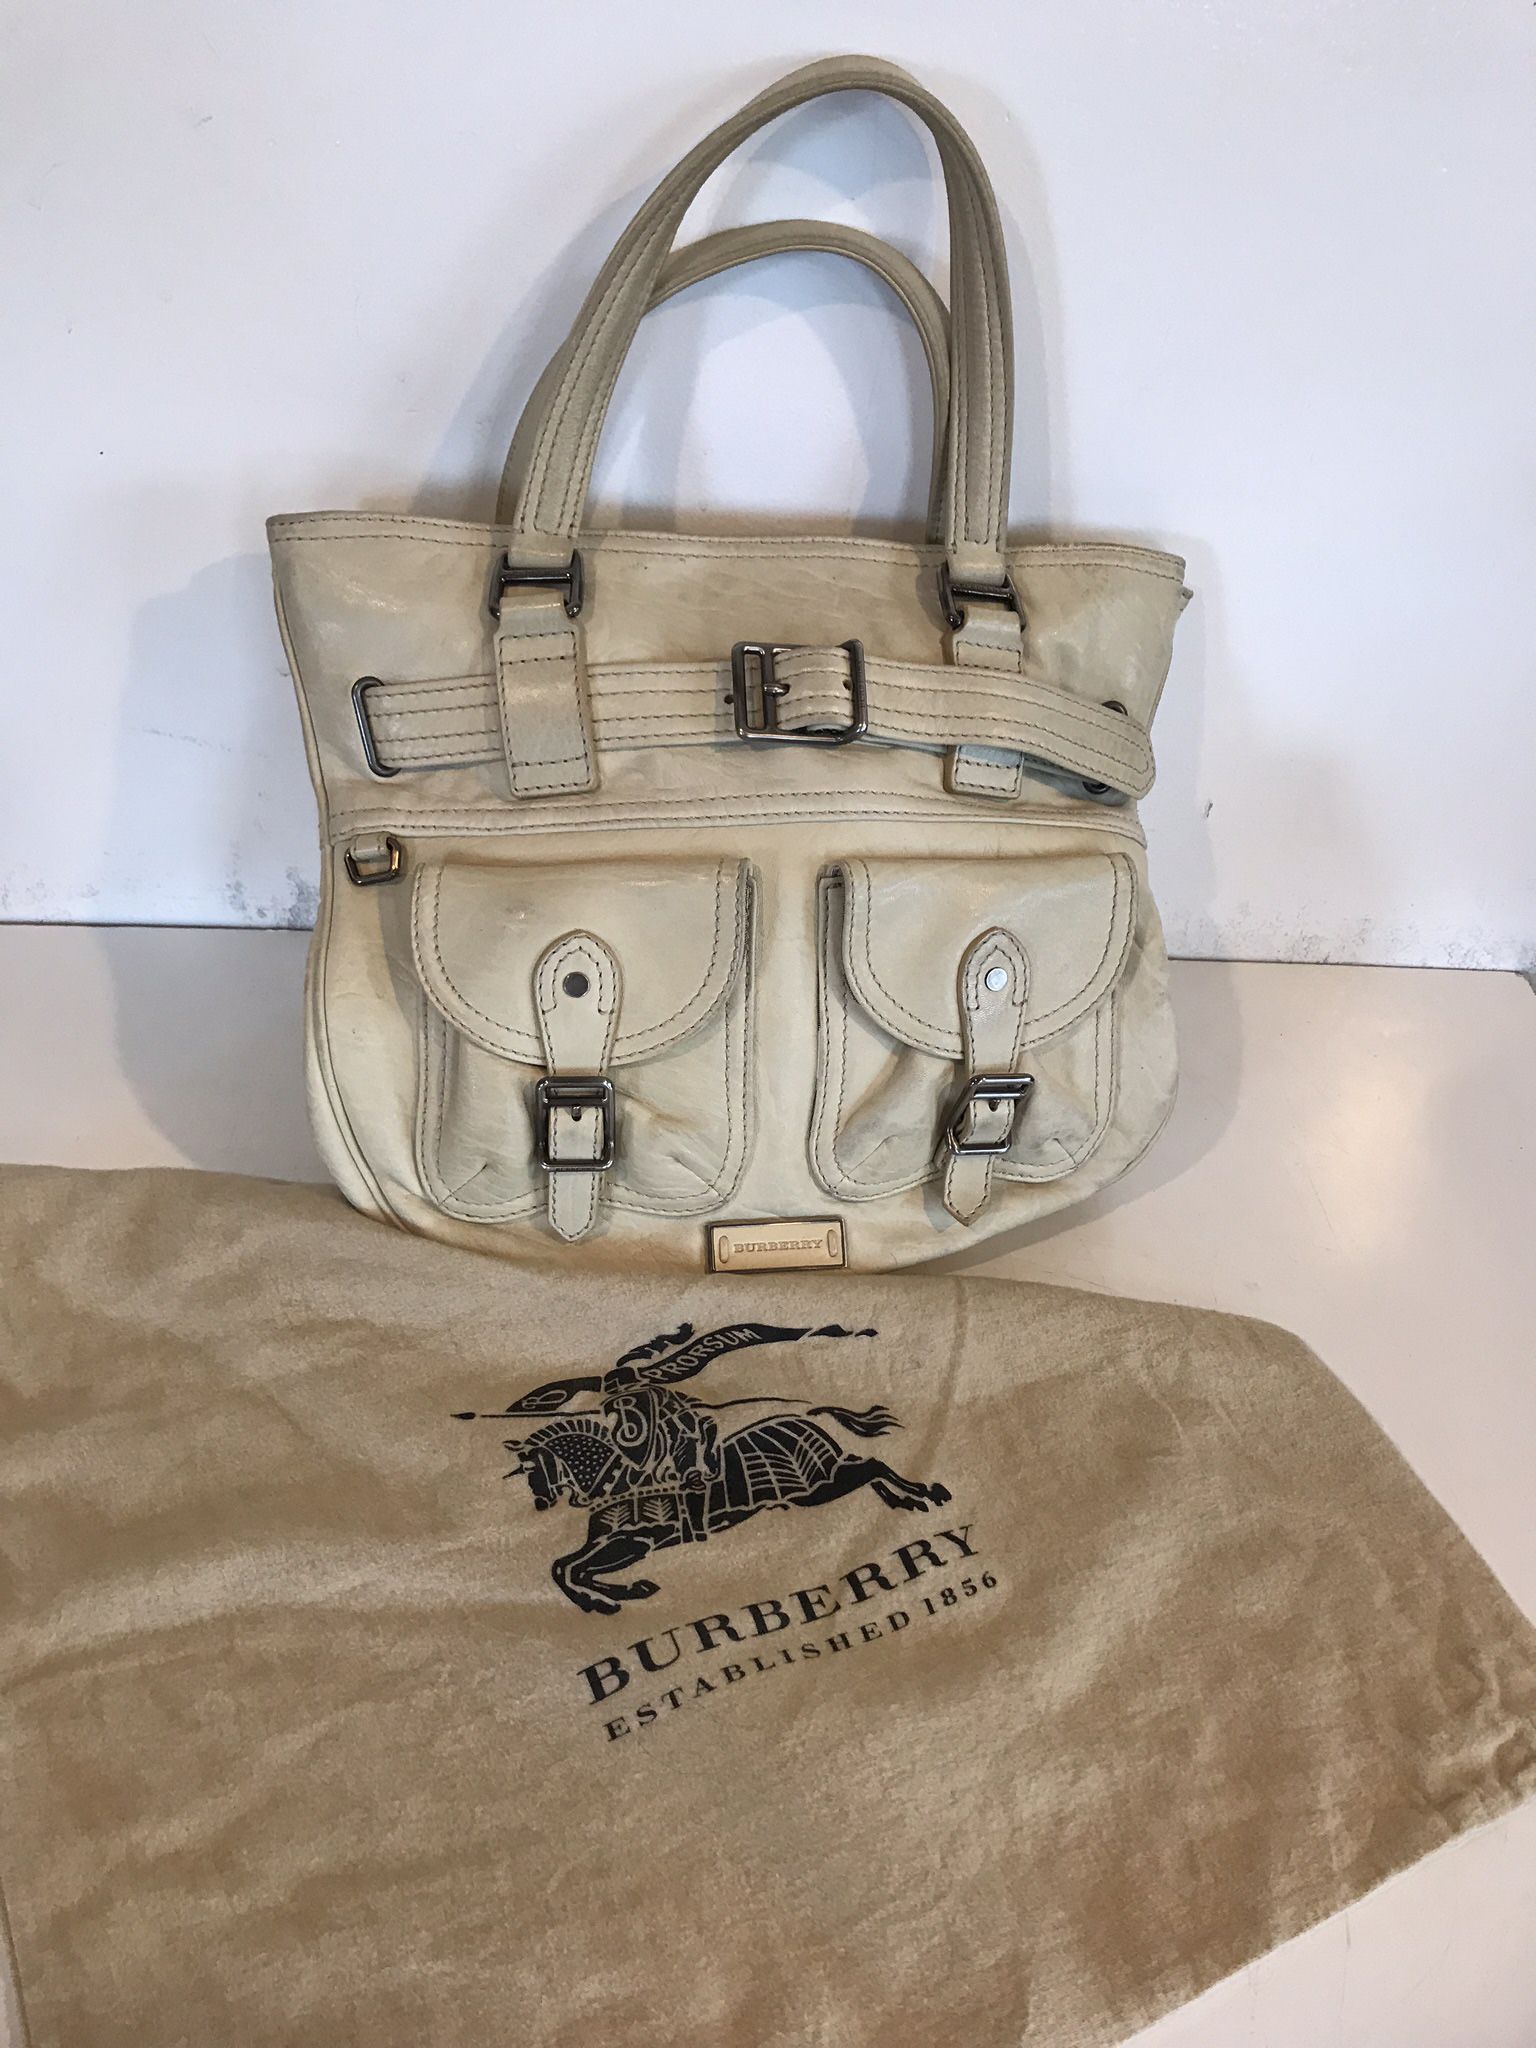 Authentic Burberry bag with dust storage bag